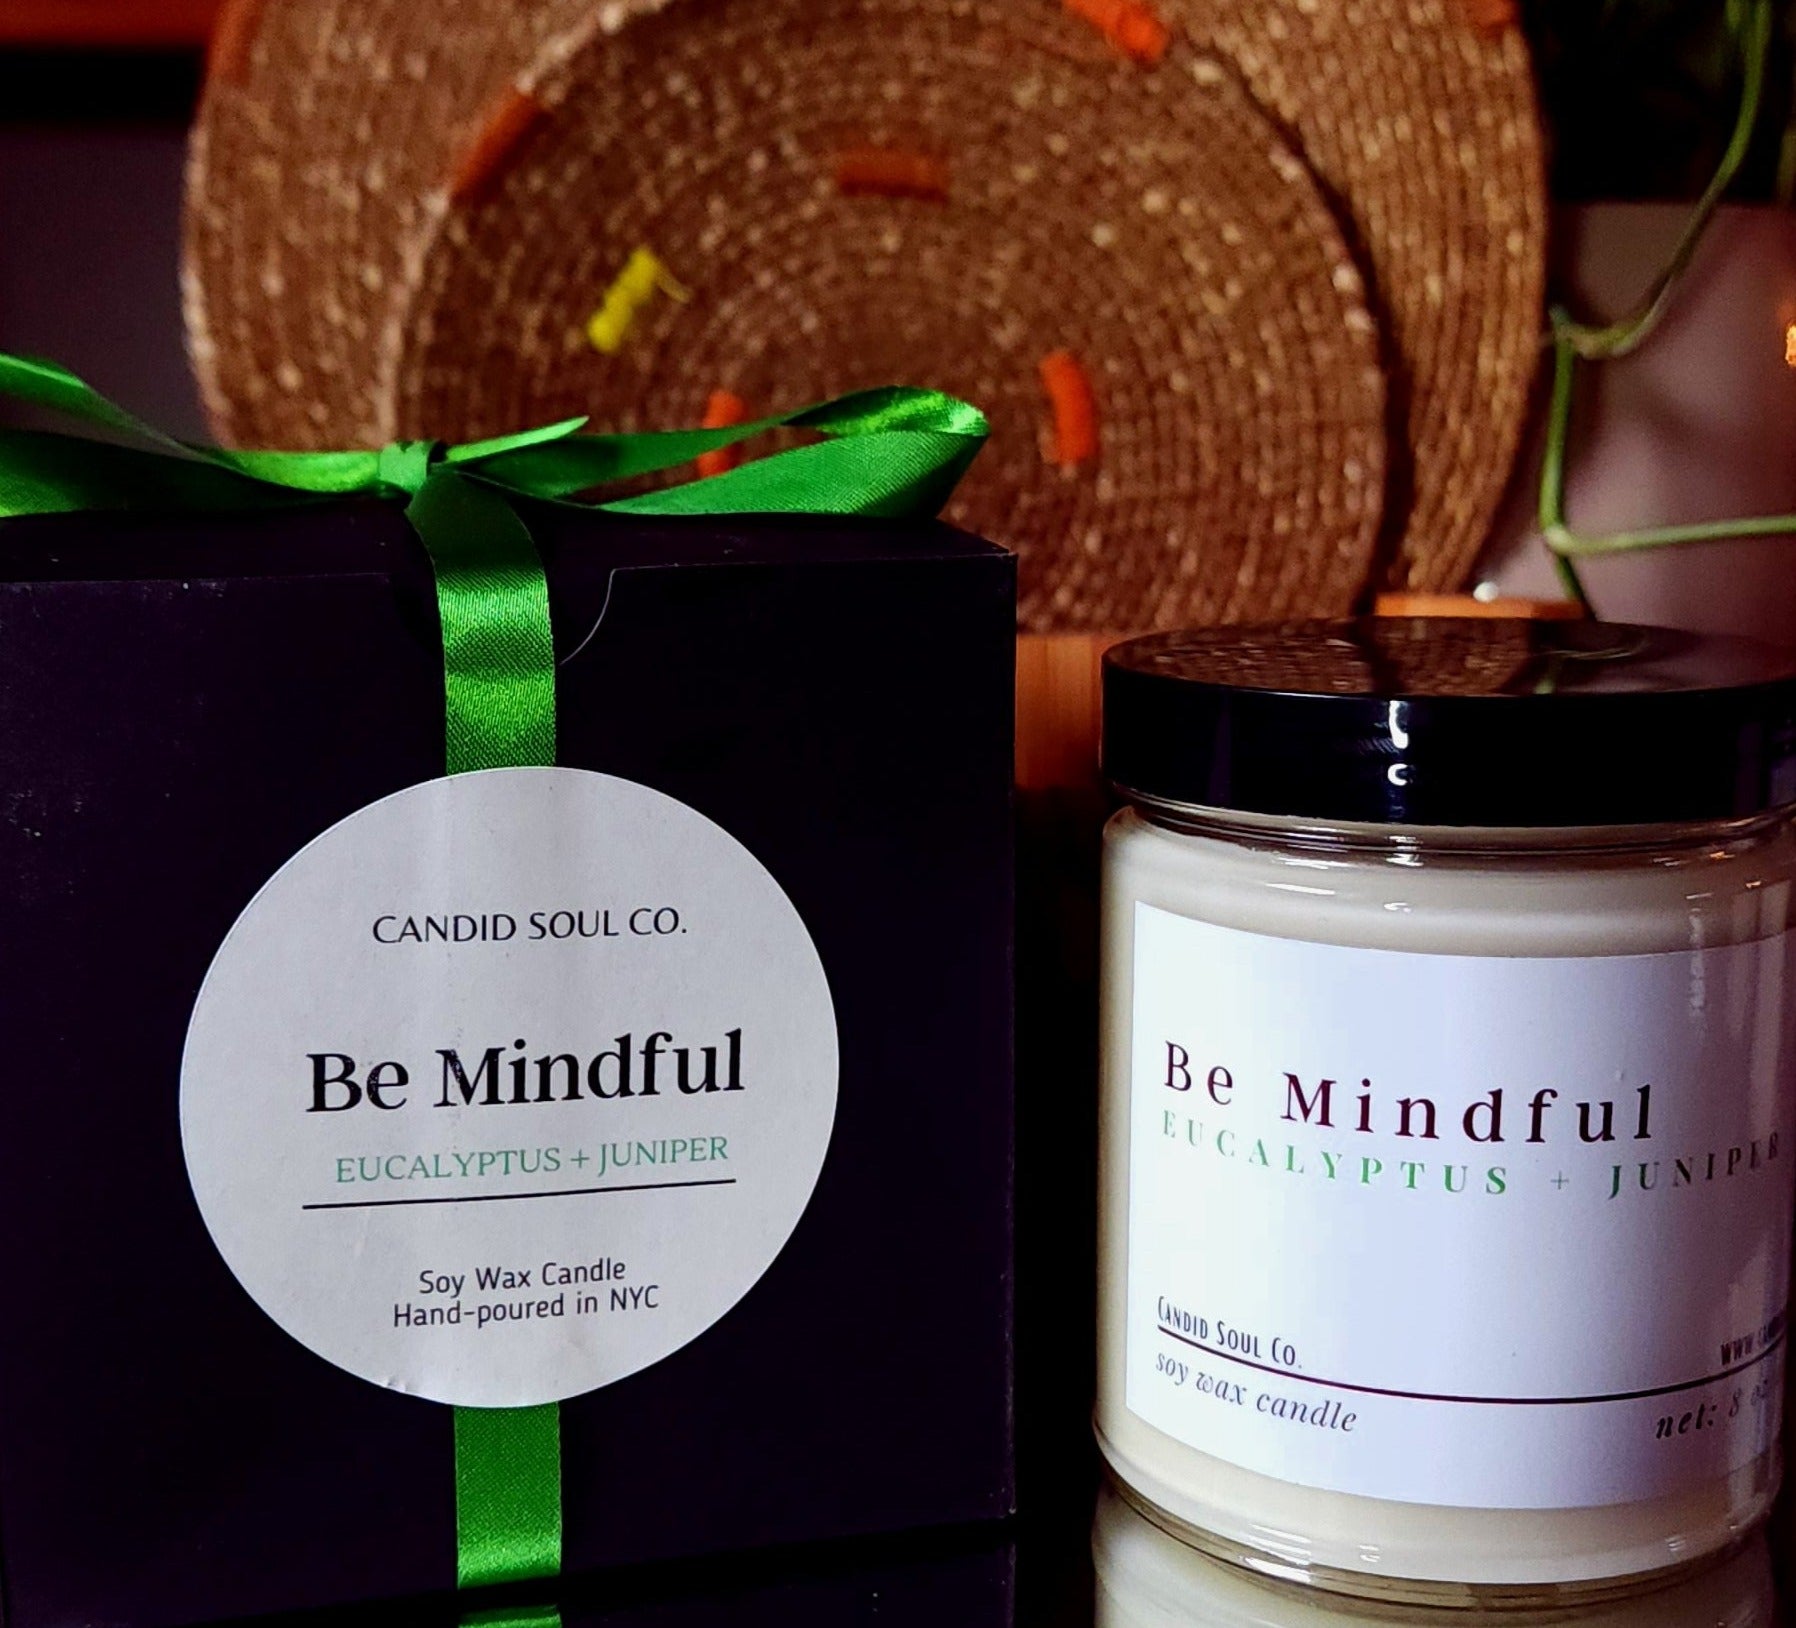 Be Mindful Eucalyptus soy wax affirmation candle